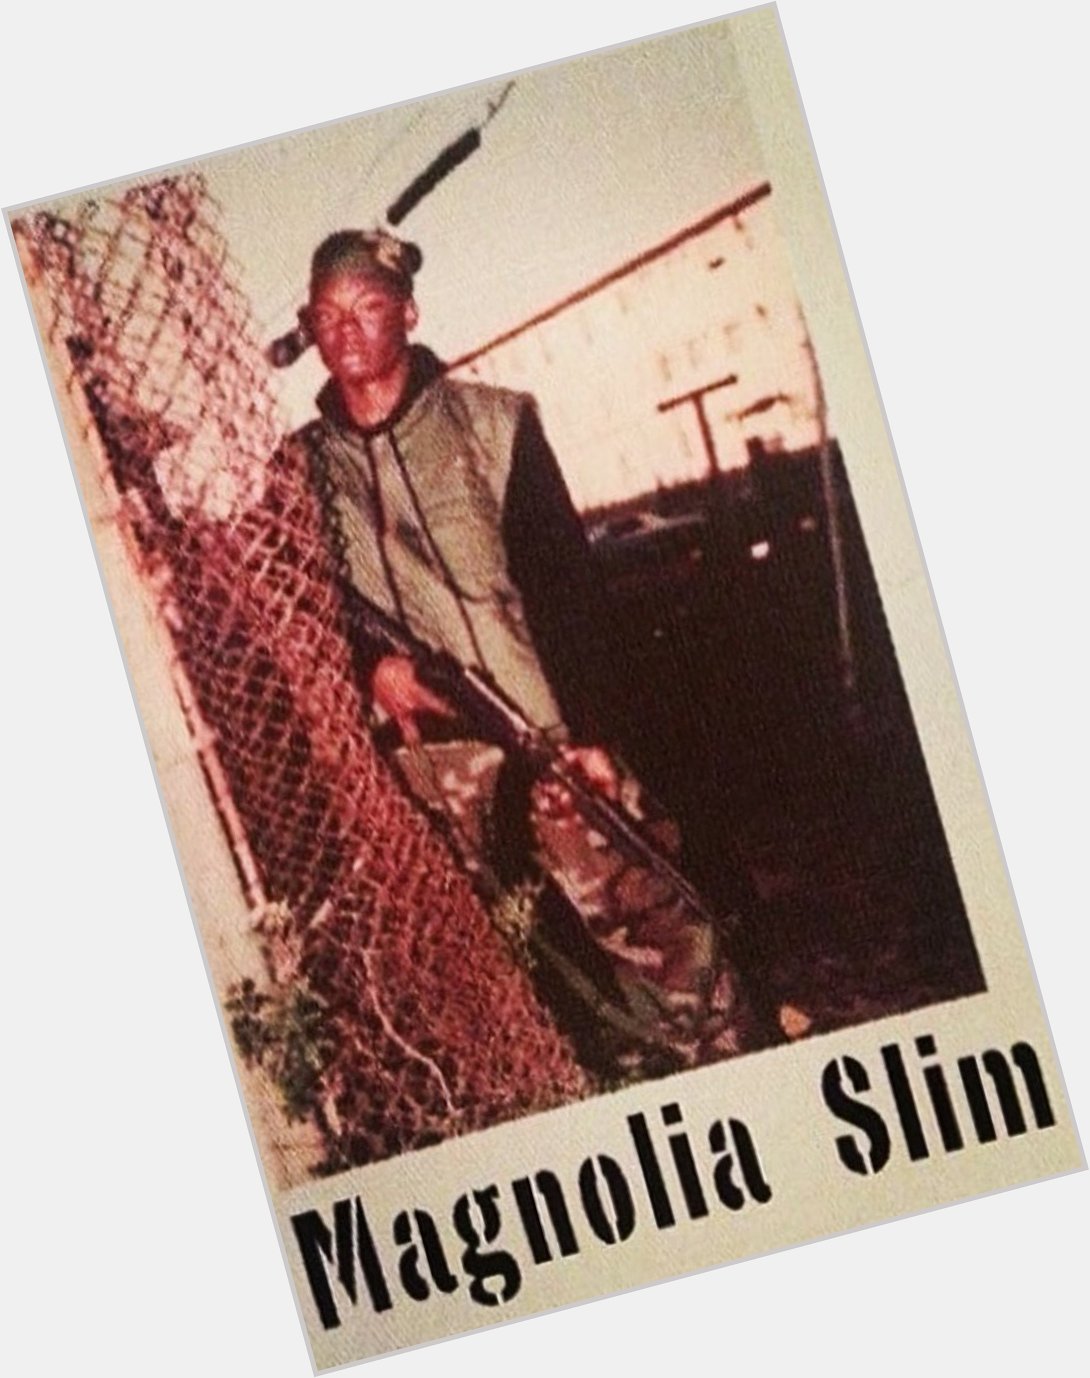 Happy birthday Soulja Slim RIP to the realest that s ever touched the streets 